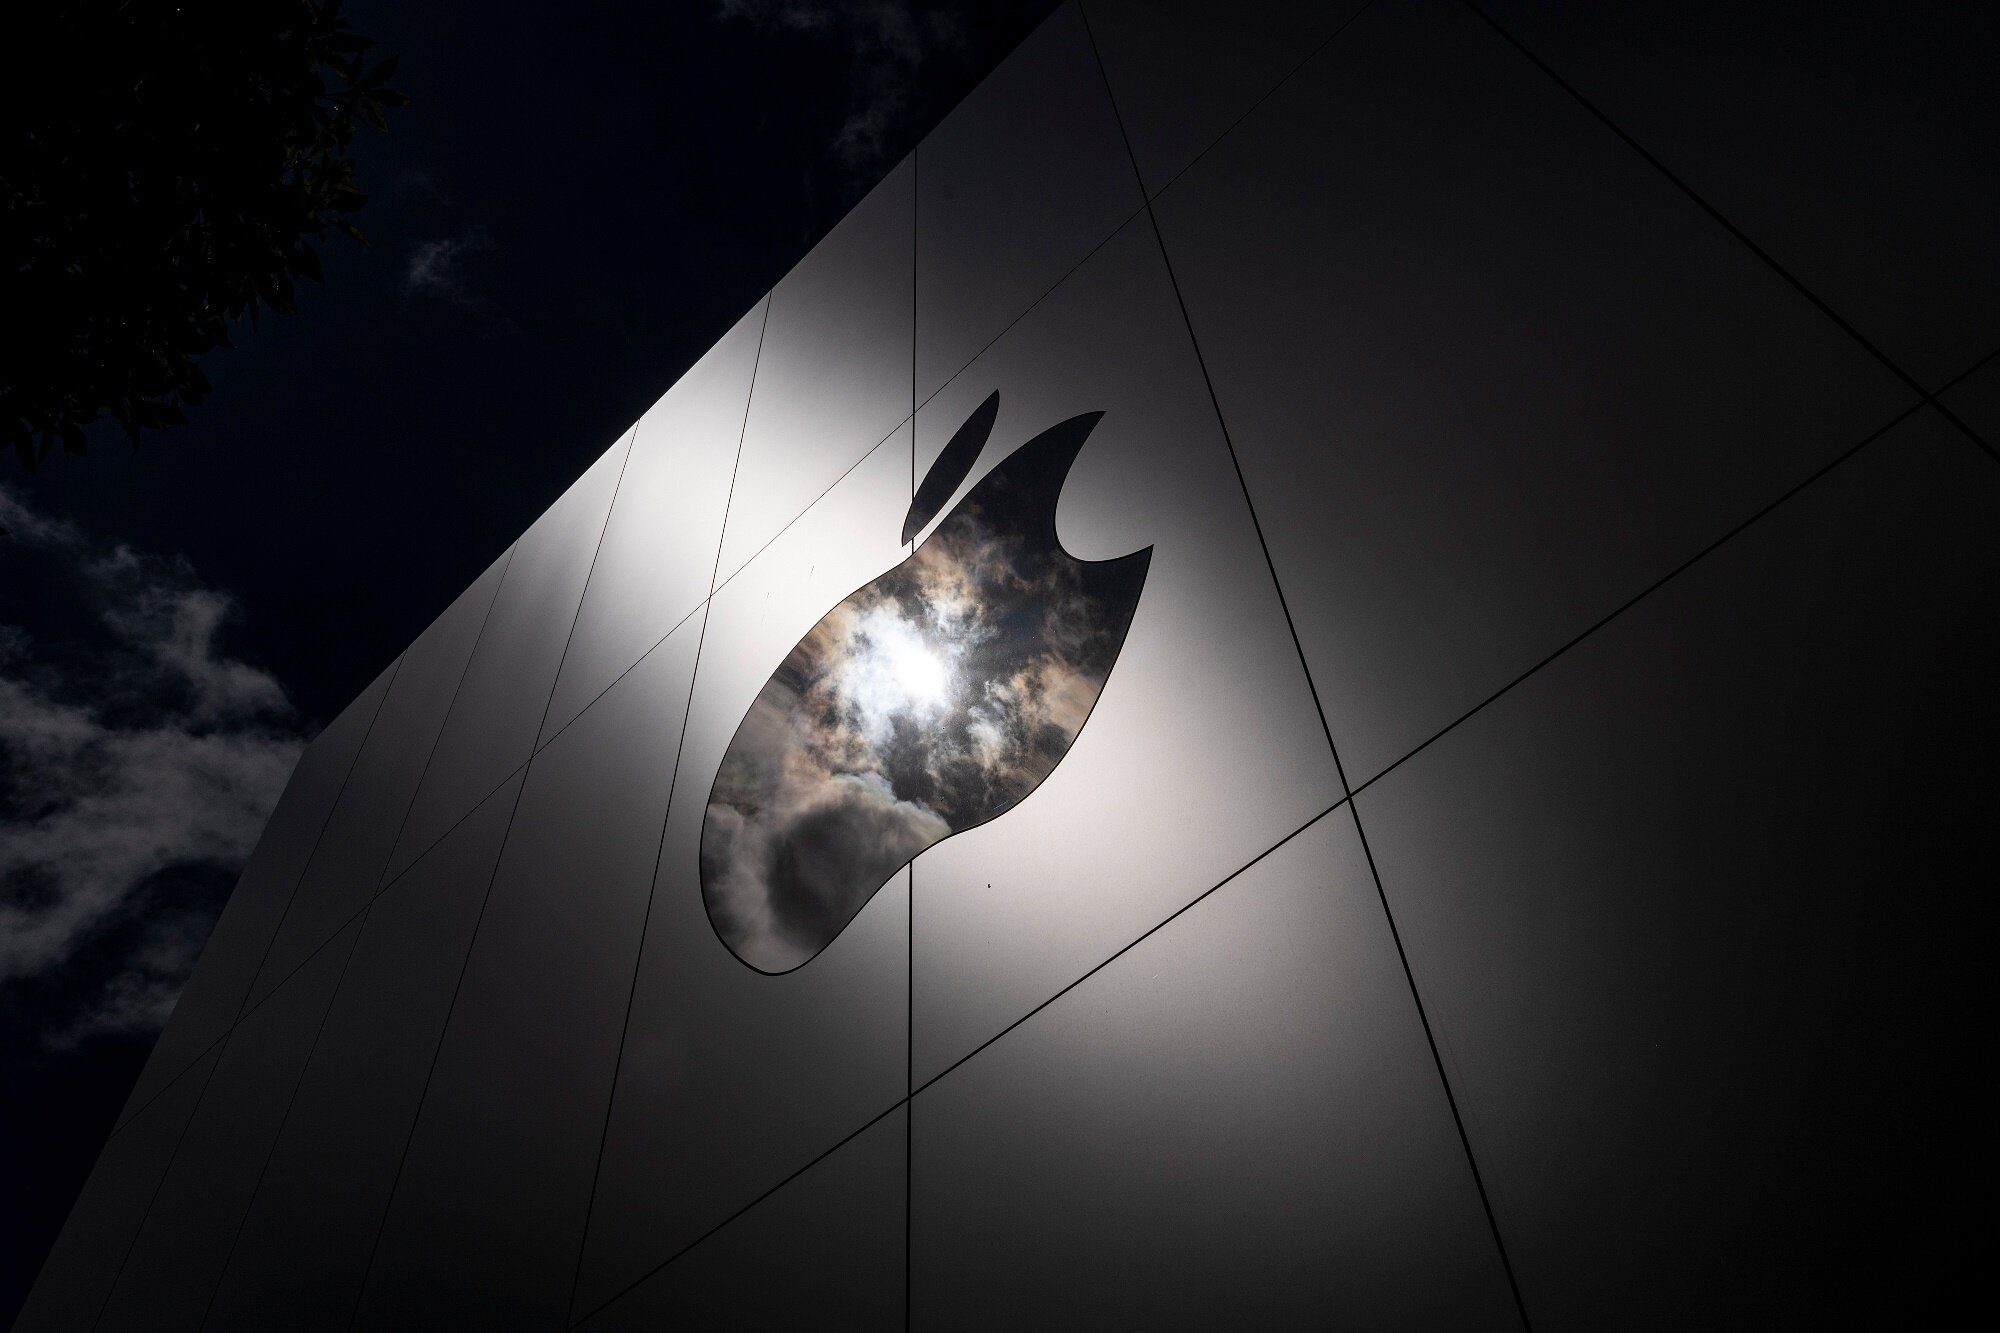 FAS obliged Apple to allow developers to specify alternative payment methods in applications